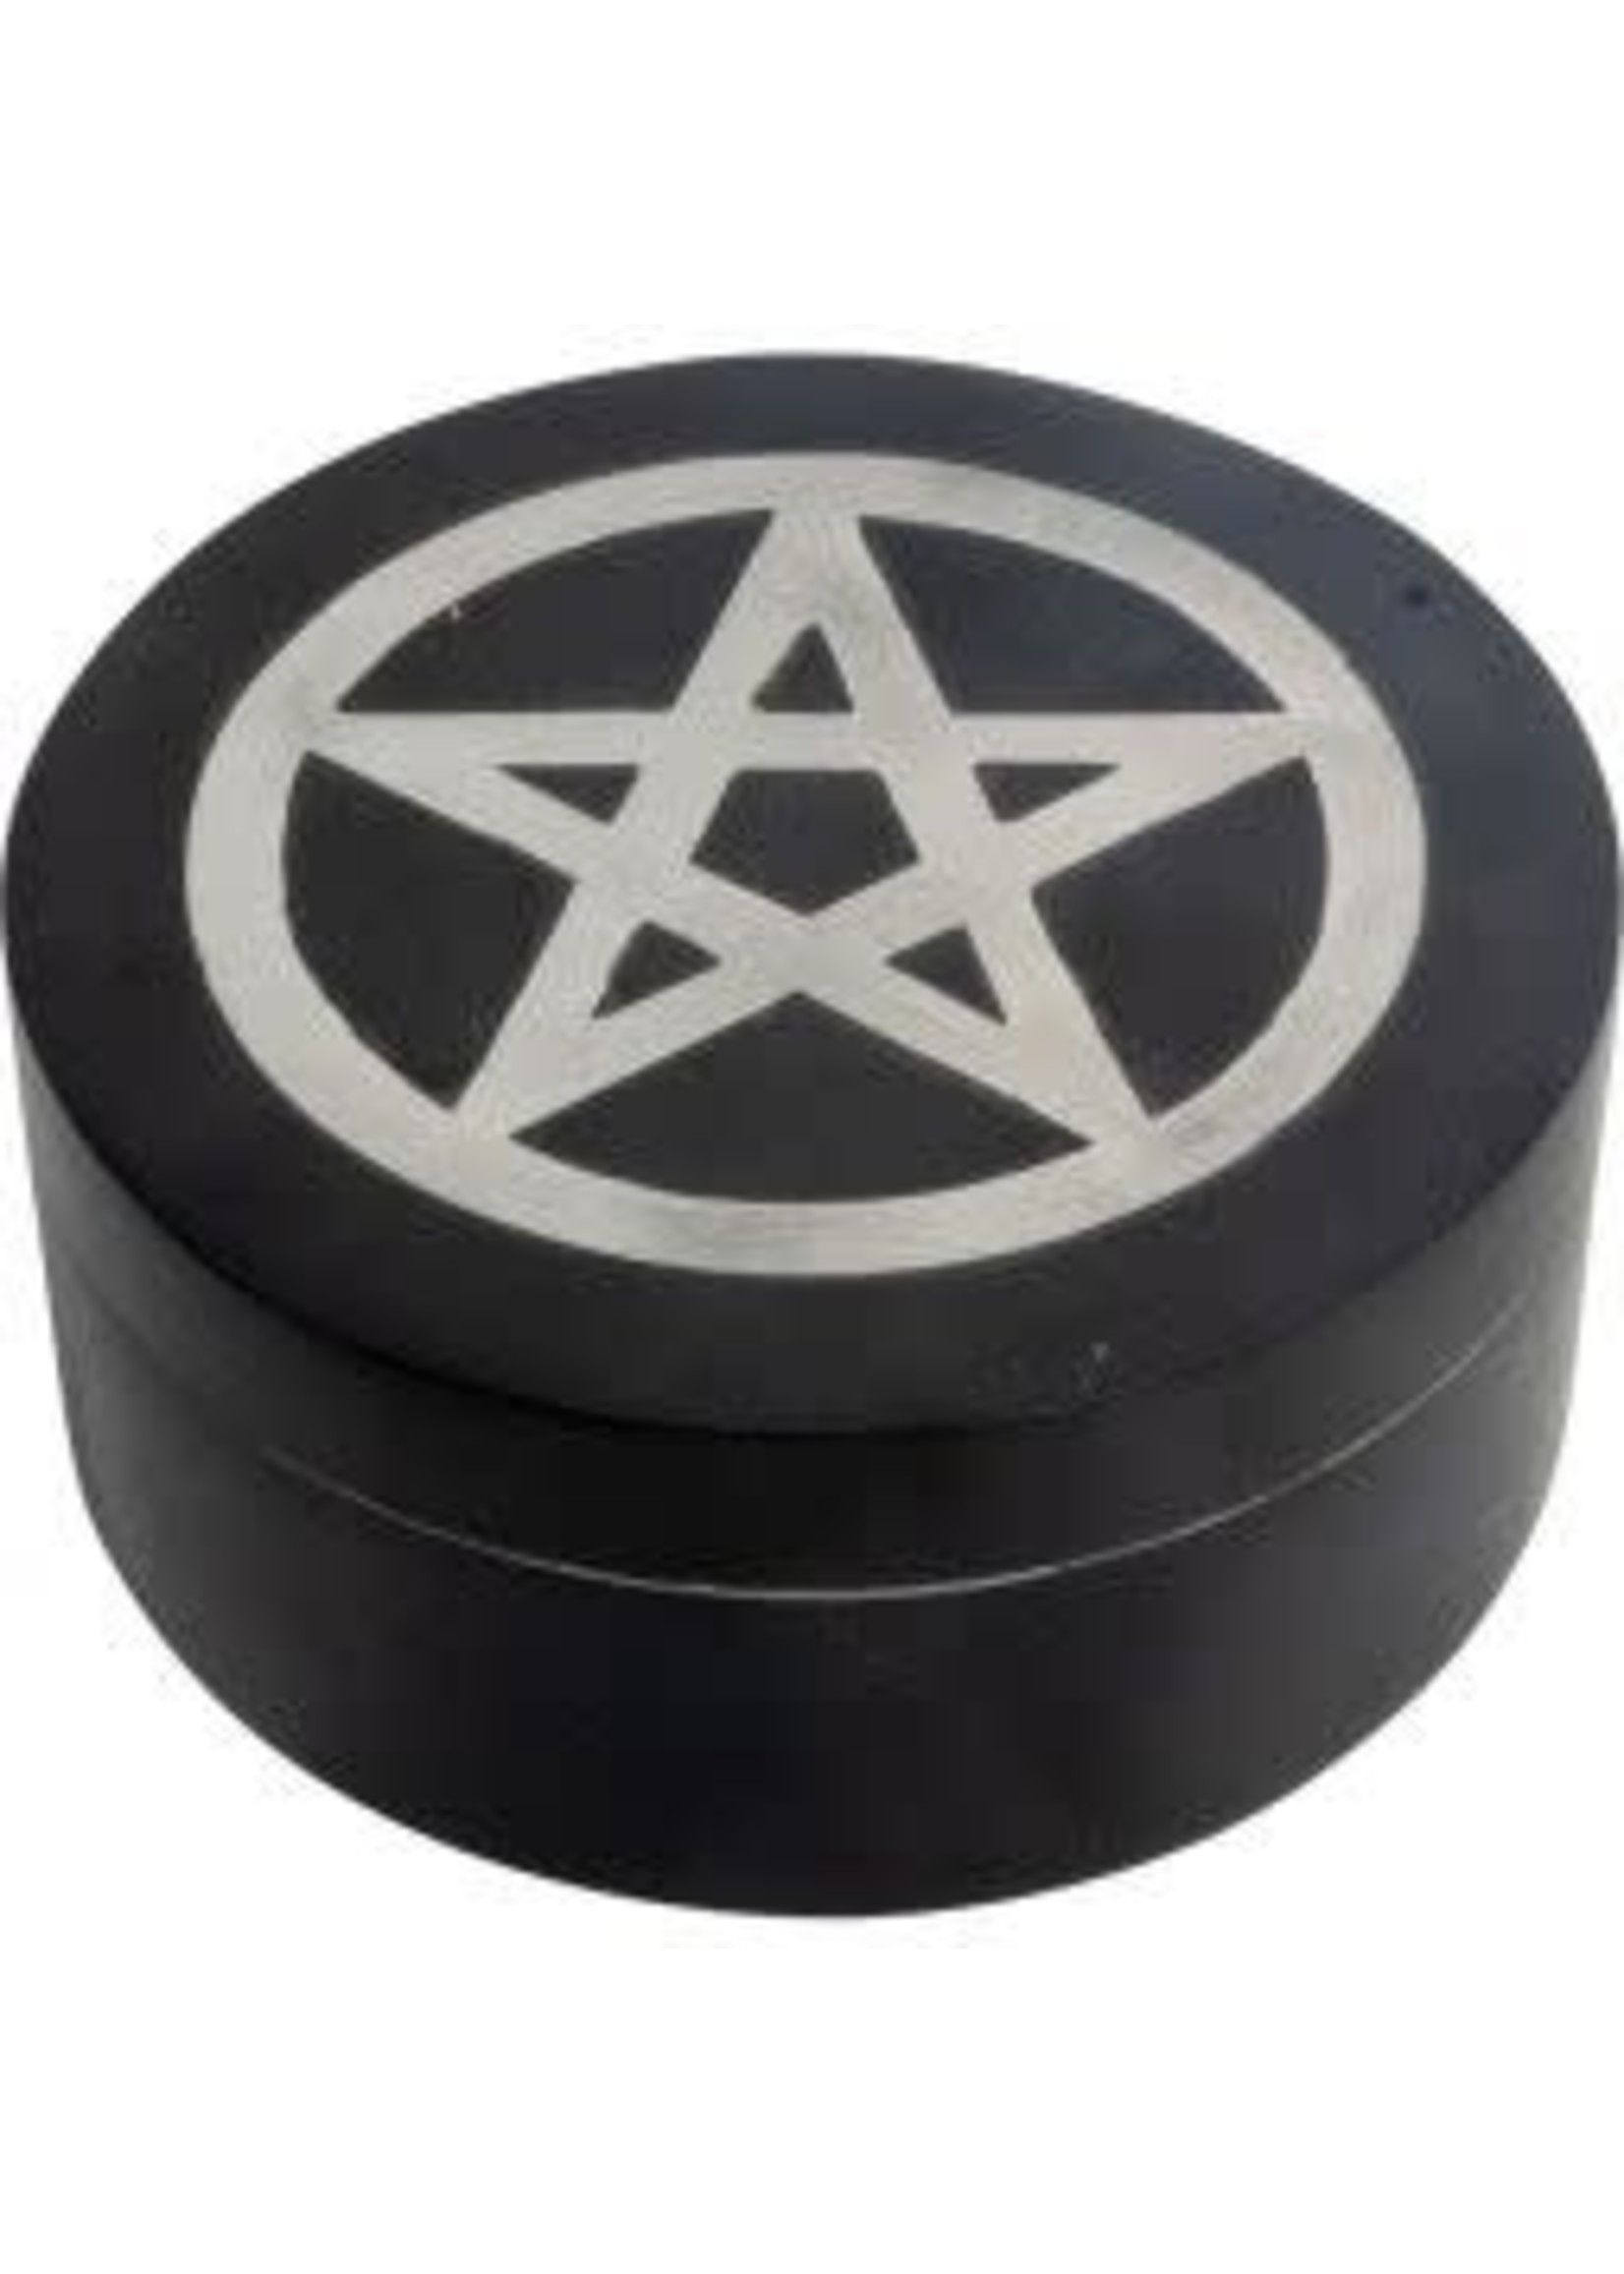 Soapstone Velvet Lined Box with Silver Inlay - Pentacle